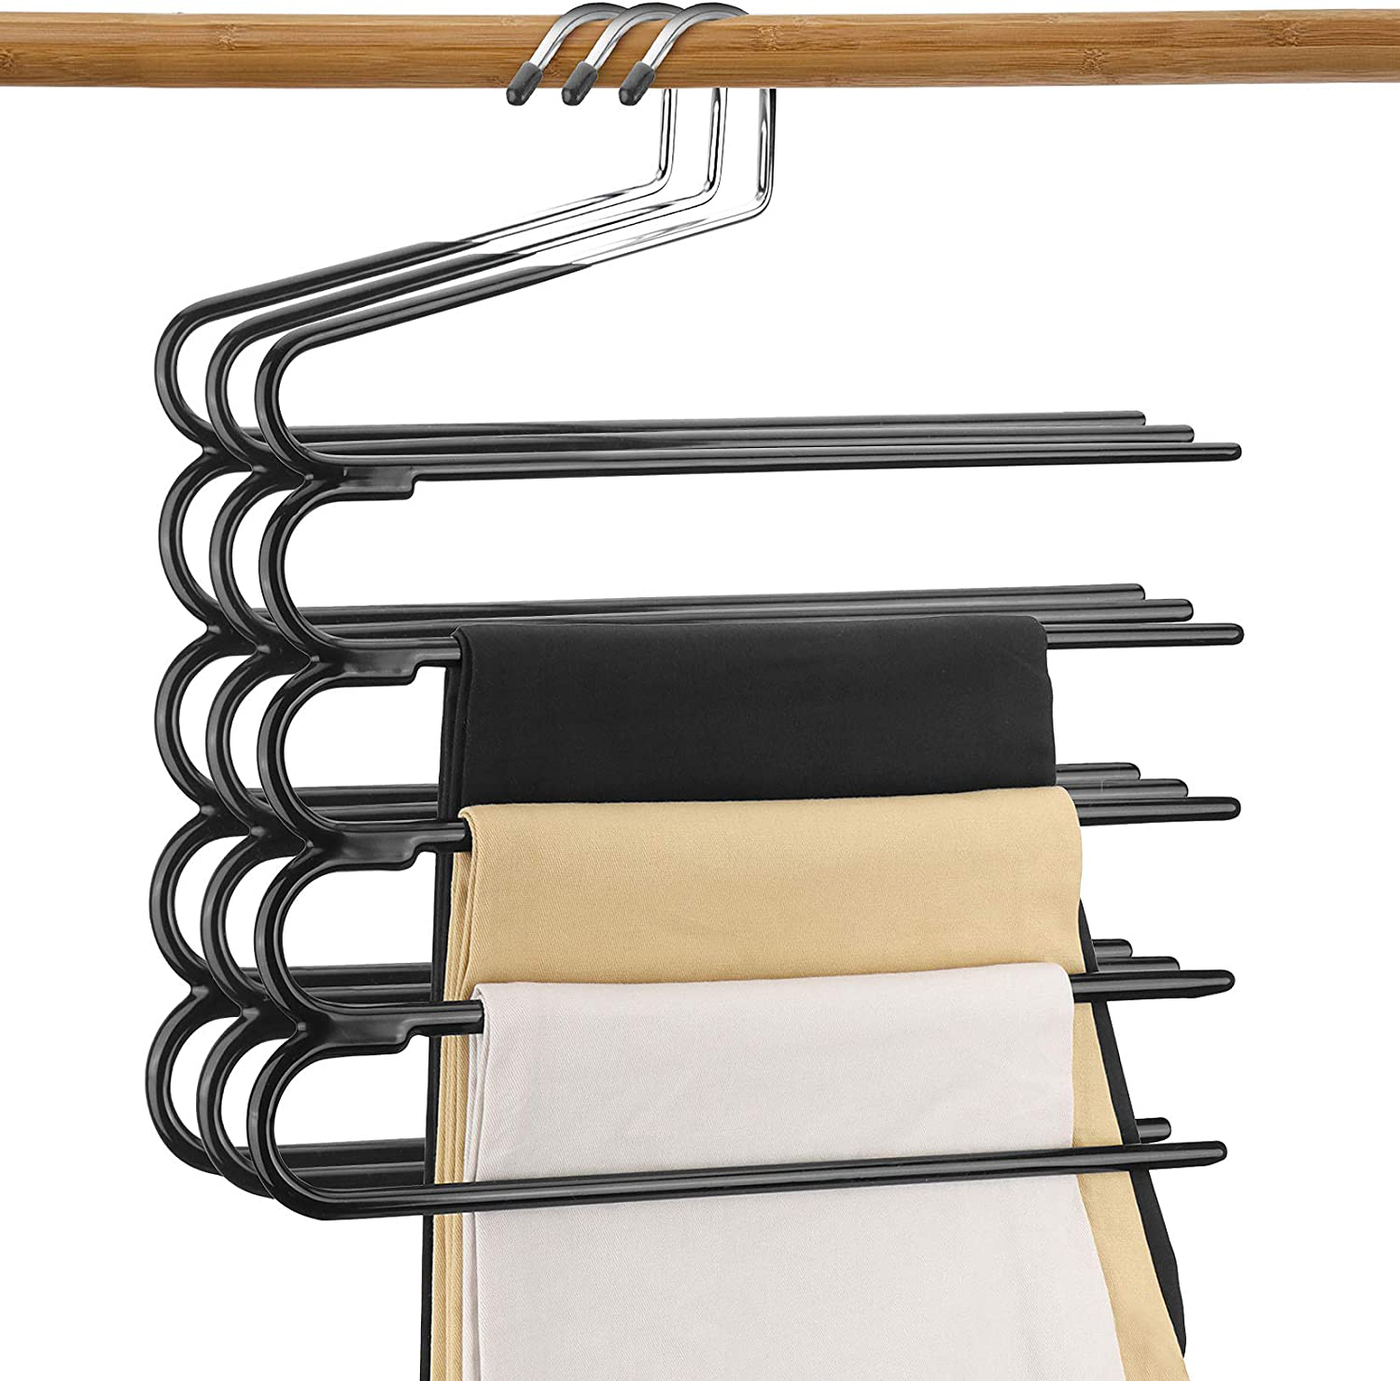 DOIOWN Pants Hangers Multi-Layer Jeans Trouser Hanger Space Saving Open –Ended Clothes Hangers Non Slip Closet Storage Organizer for Jeans Towels Scarves (3)